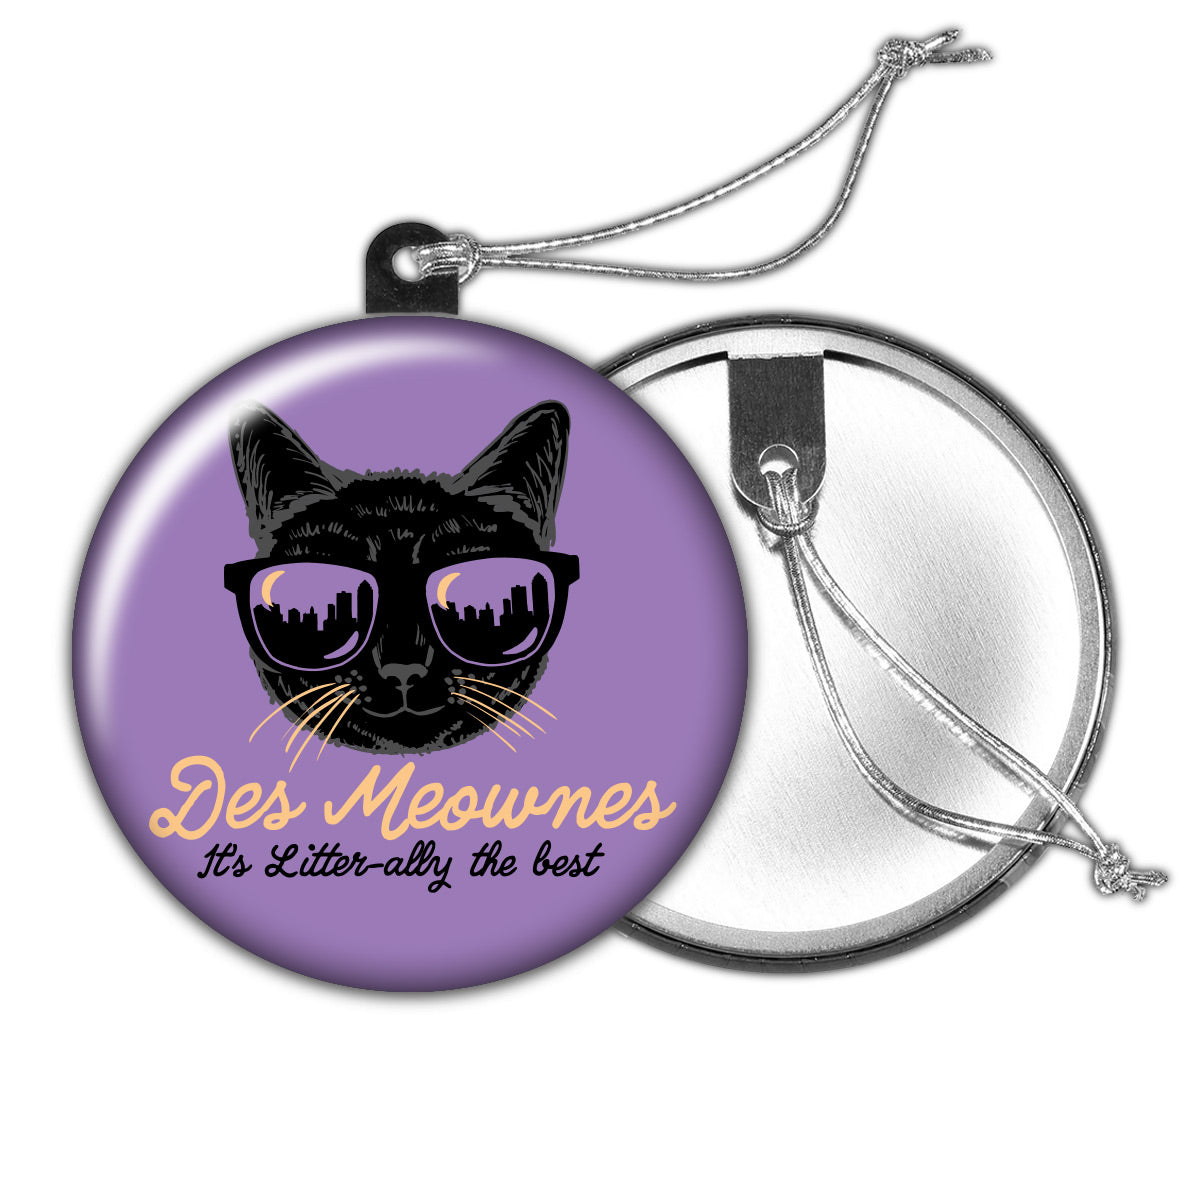 Des Meownes Litter-ally The Best Holiday Ornament - Bozz Prints